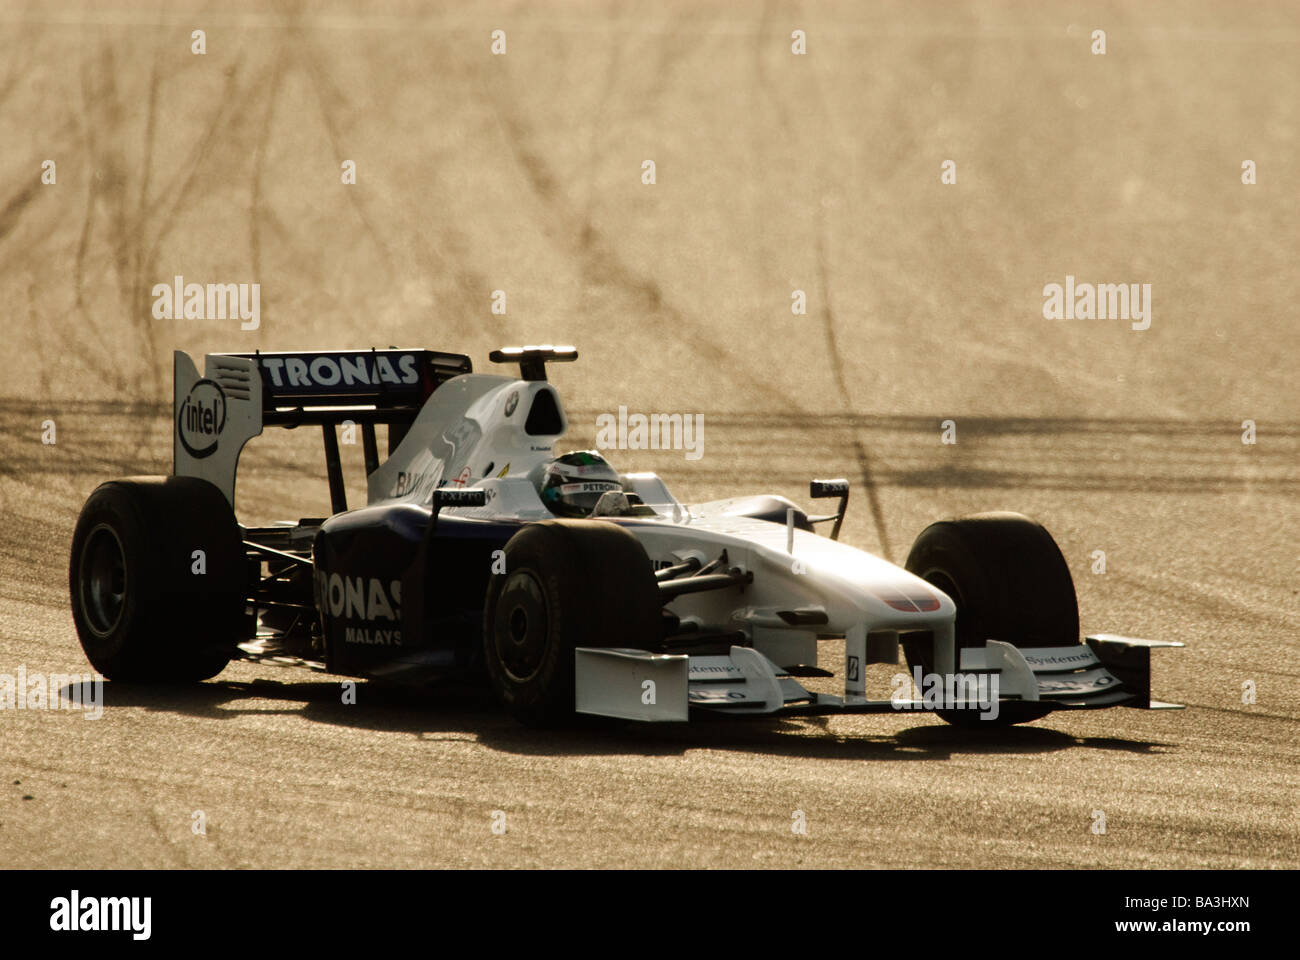 Nick HEIDFELD in the BMW F1 09 race car during Formula One testing sessions in March 2009 Stock Photo